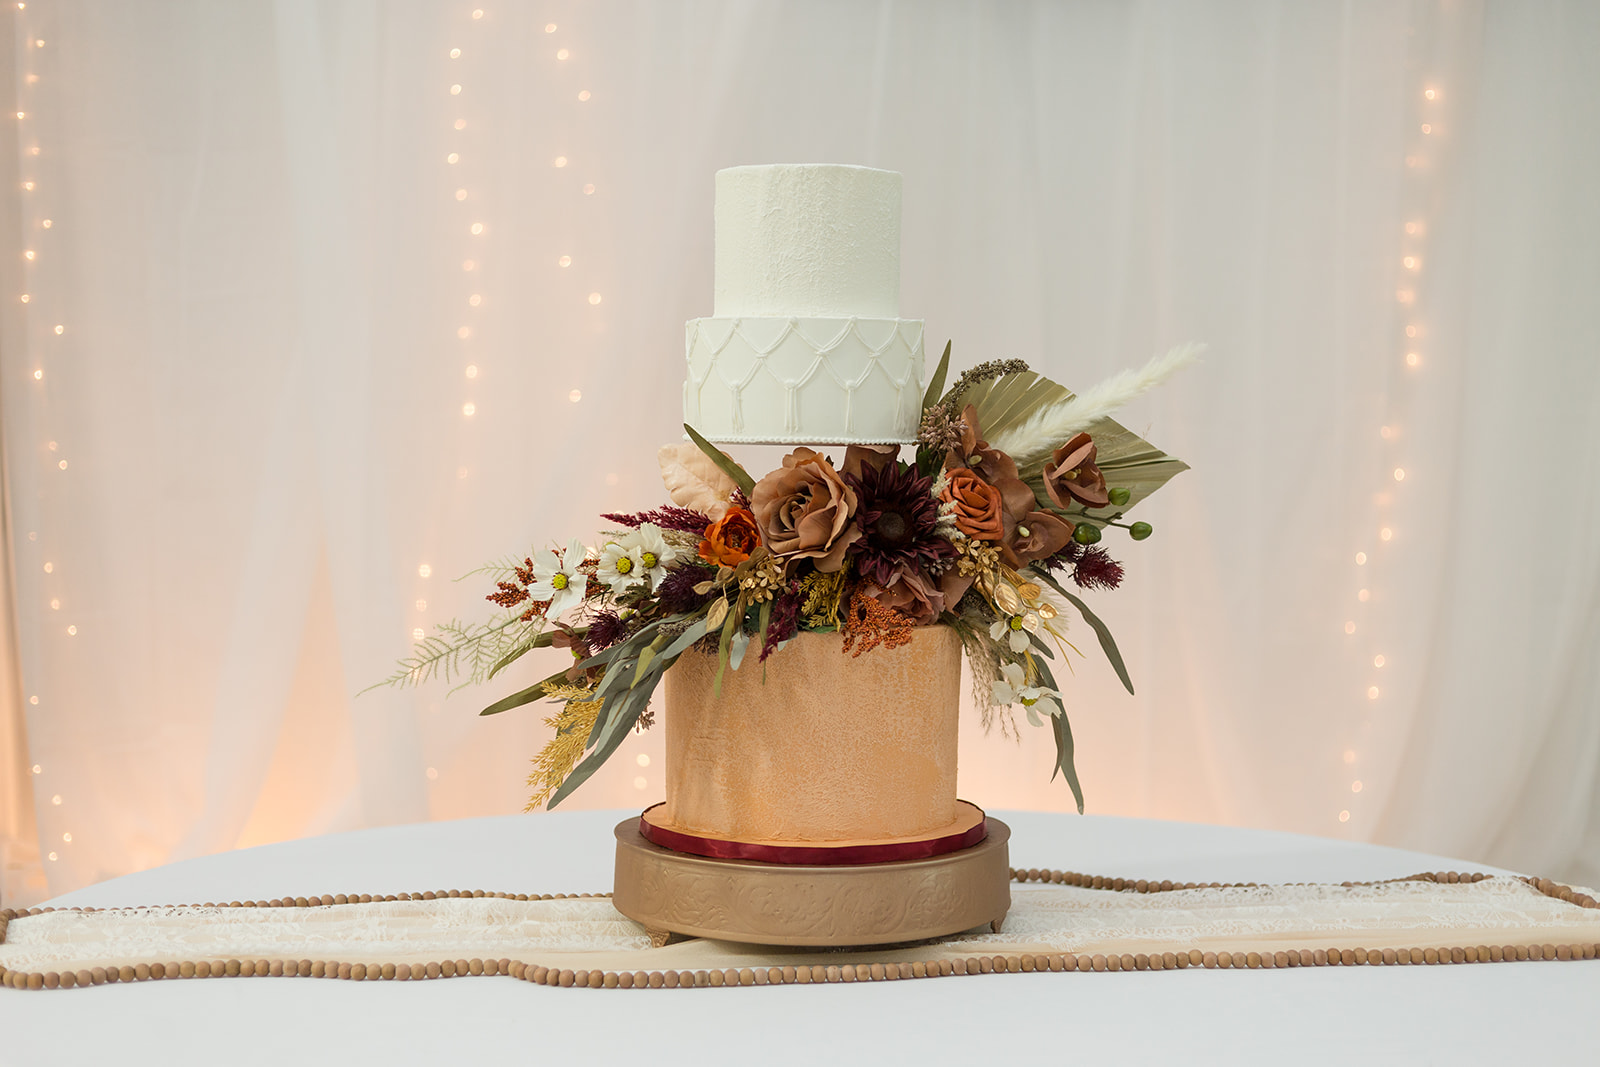 A gorgeous styled cake at a wedding shoot at whitetail acres venue in lima ohio 